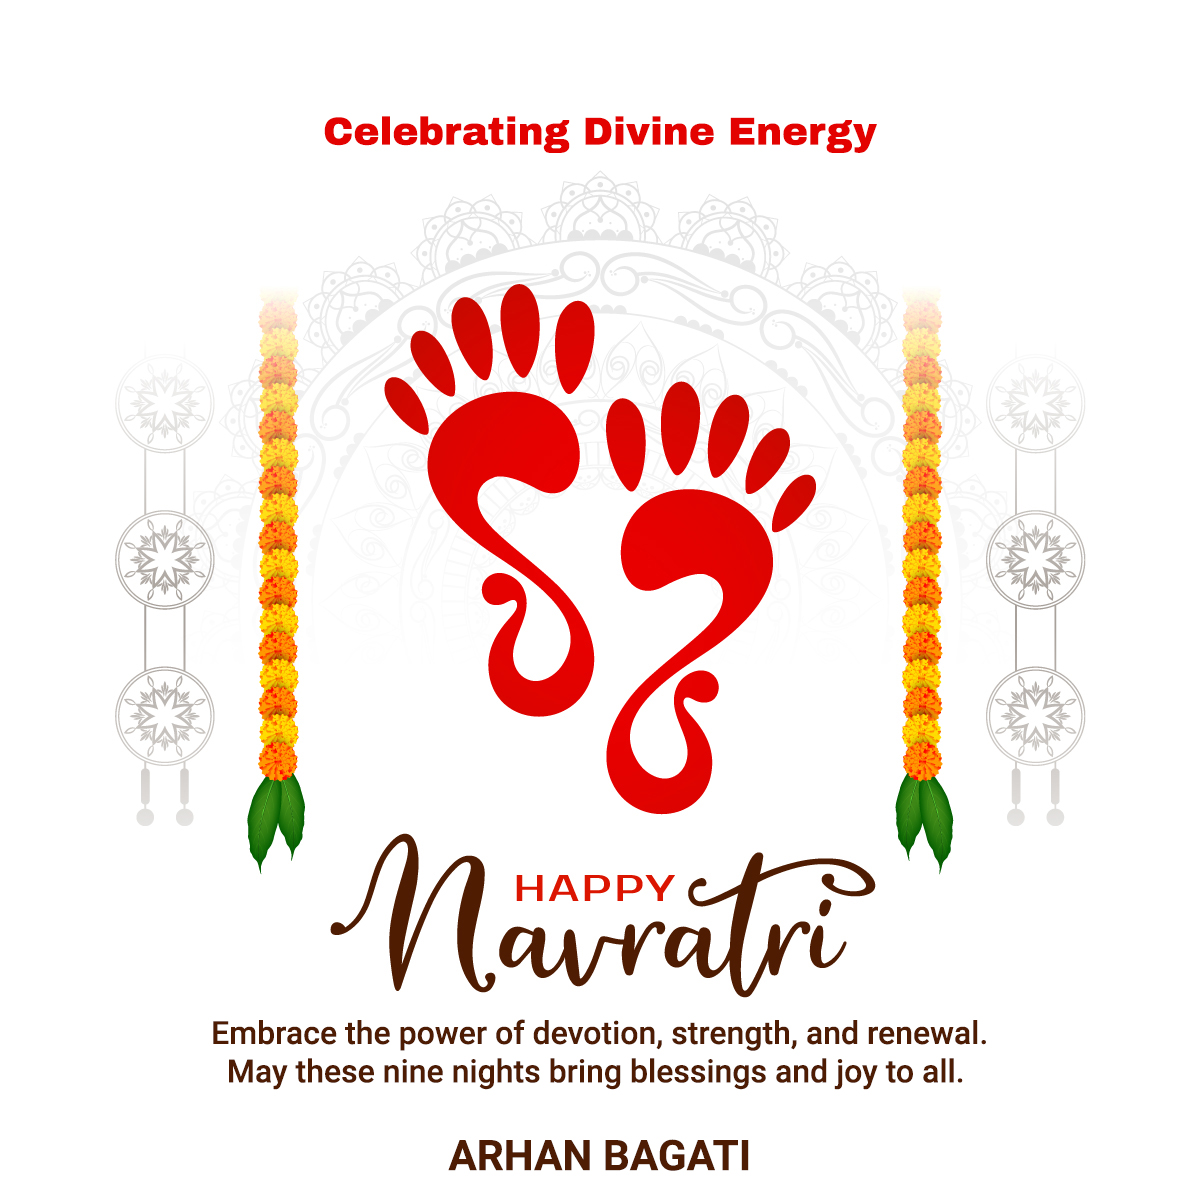 Radiant Nights of Faith: This Navratri, may the divine presence of Goddess Durga fill your life with peace, prosperity, and endless blessings. Celebrating the power of hope and devotion. Wishing you a serene and joyous Navratri! 🌺🕊 #NavratriBlessings #SacredCelebration